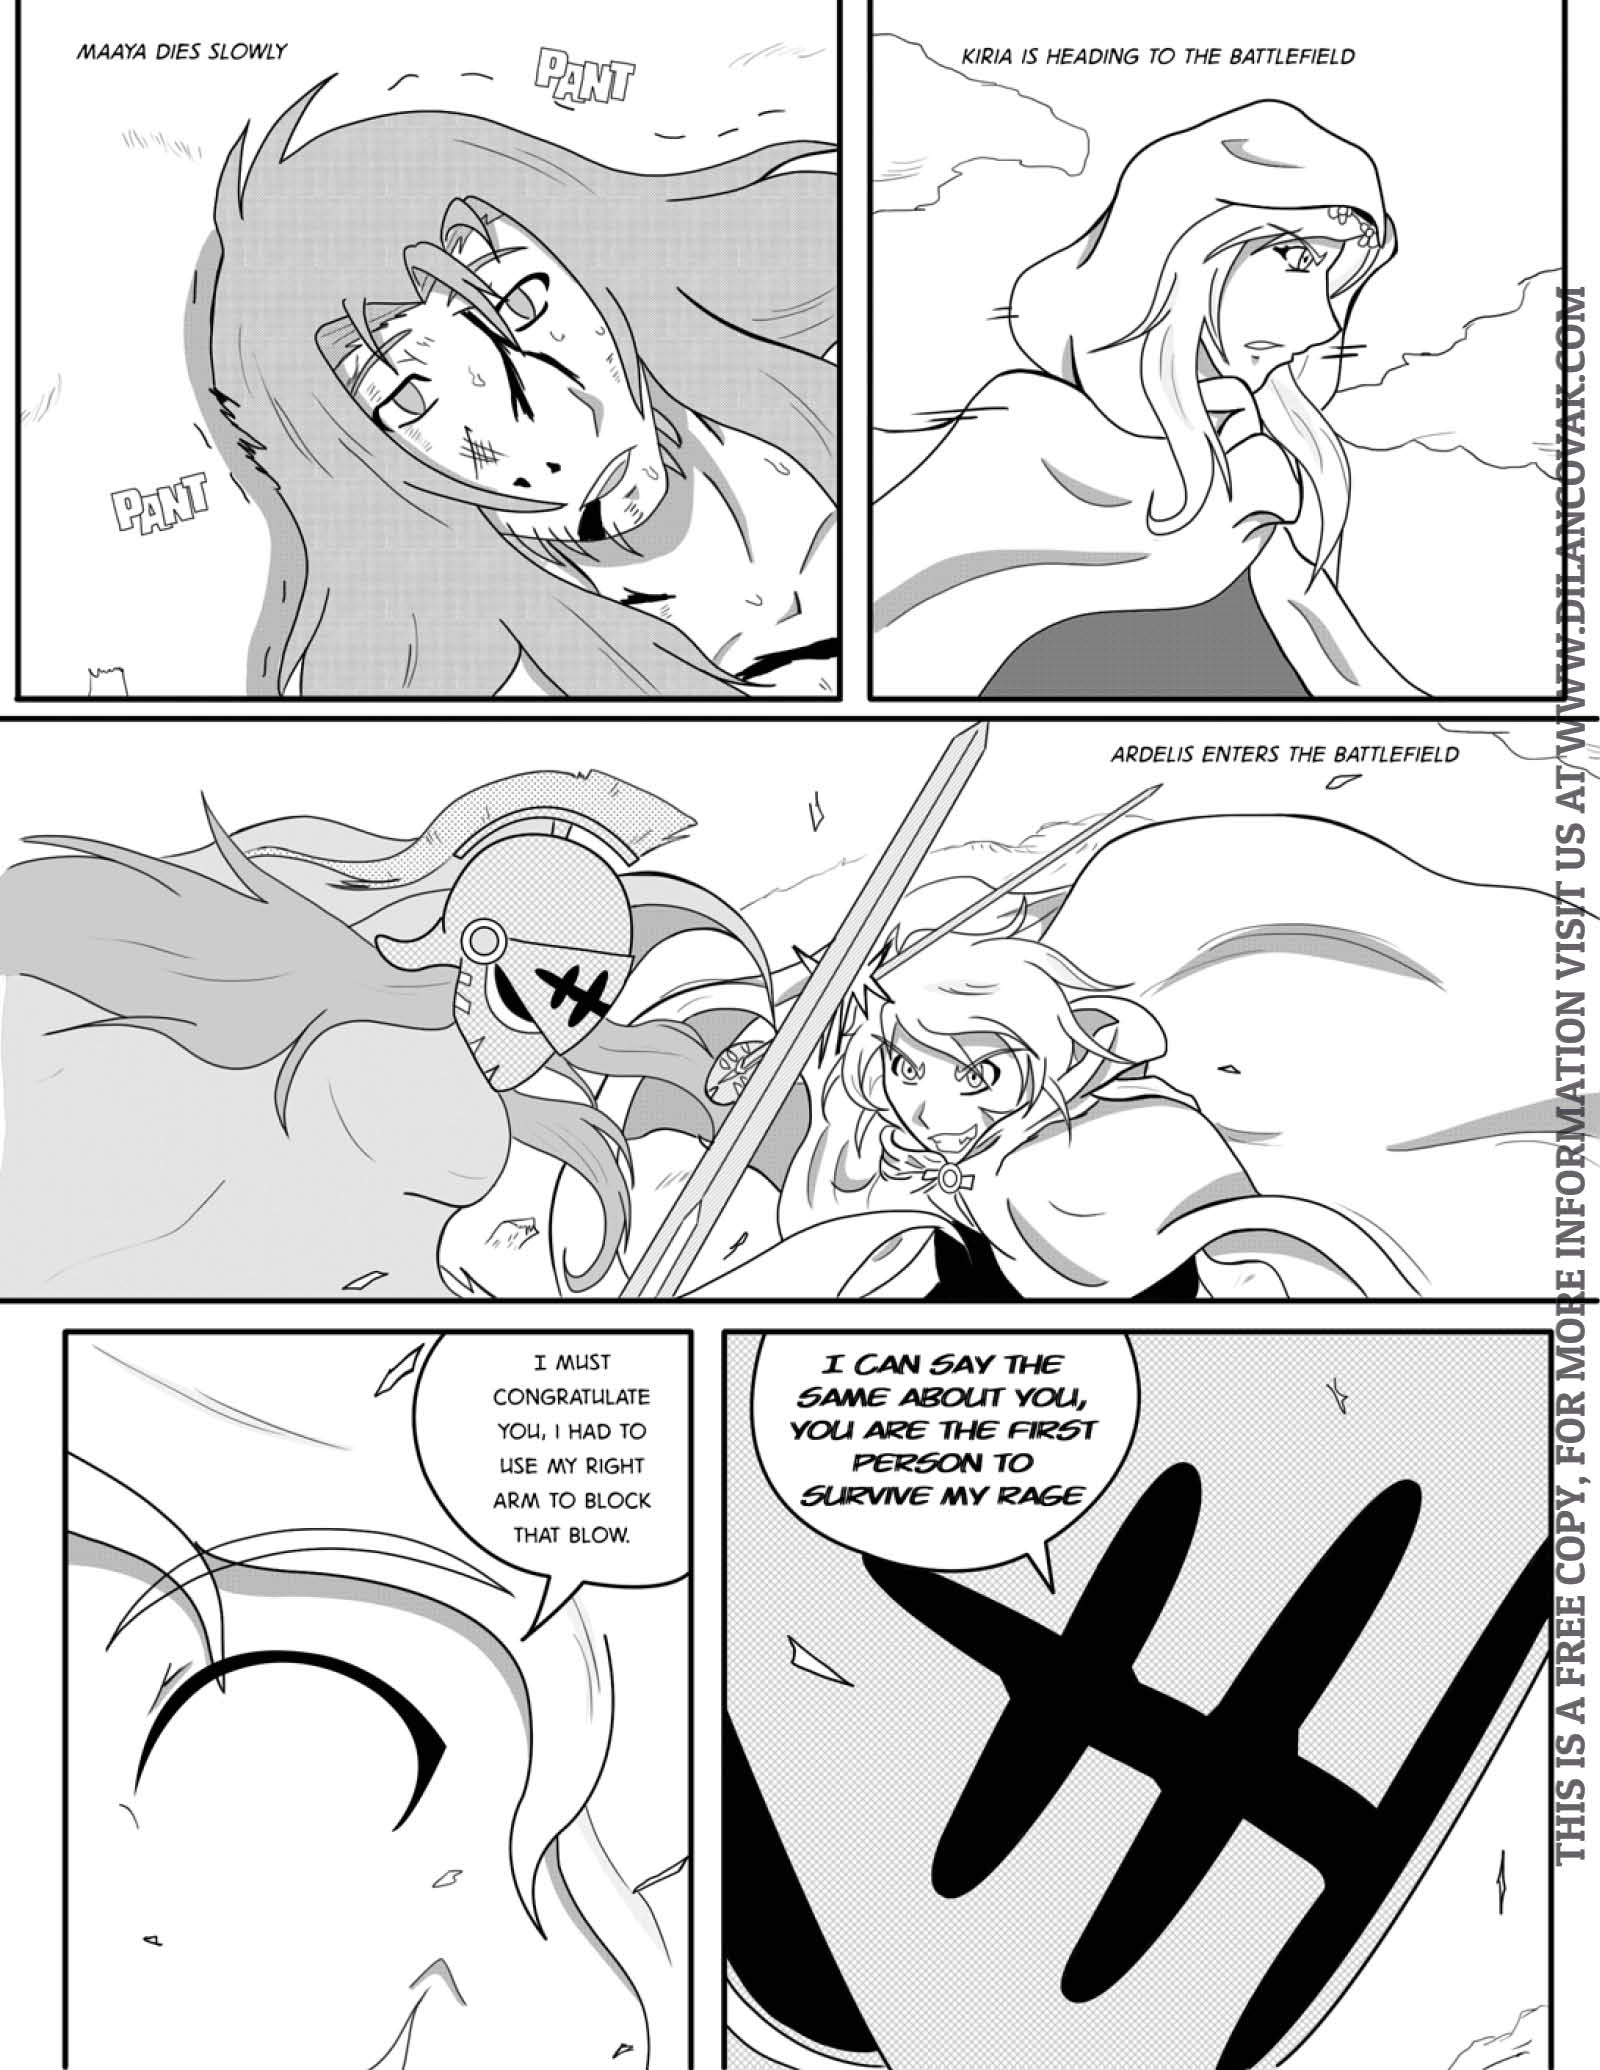 Series Dilan: the Chronicles of Covak - Chapter 4 - Page 2 - Language ENG